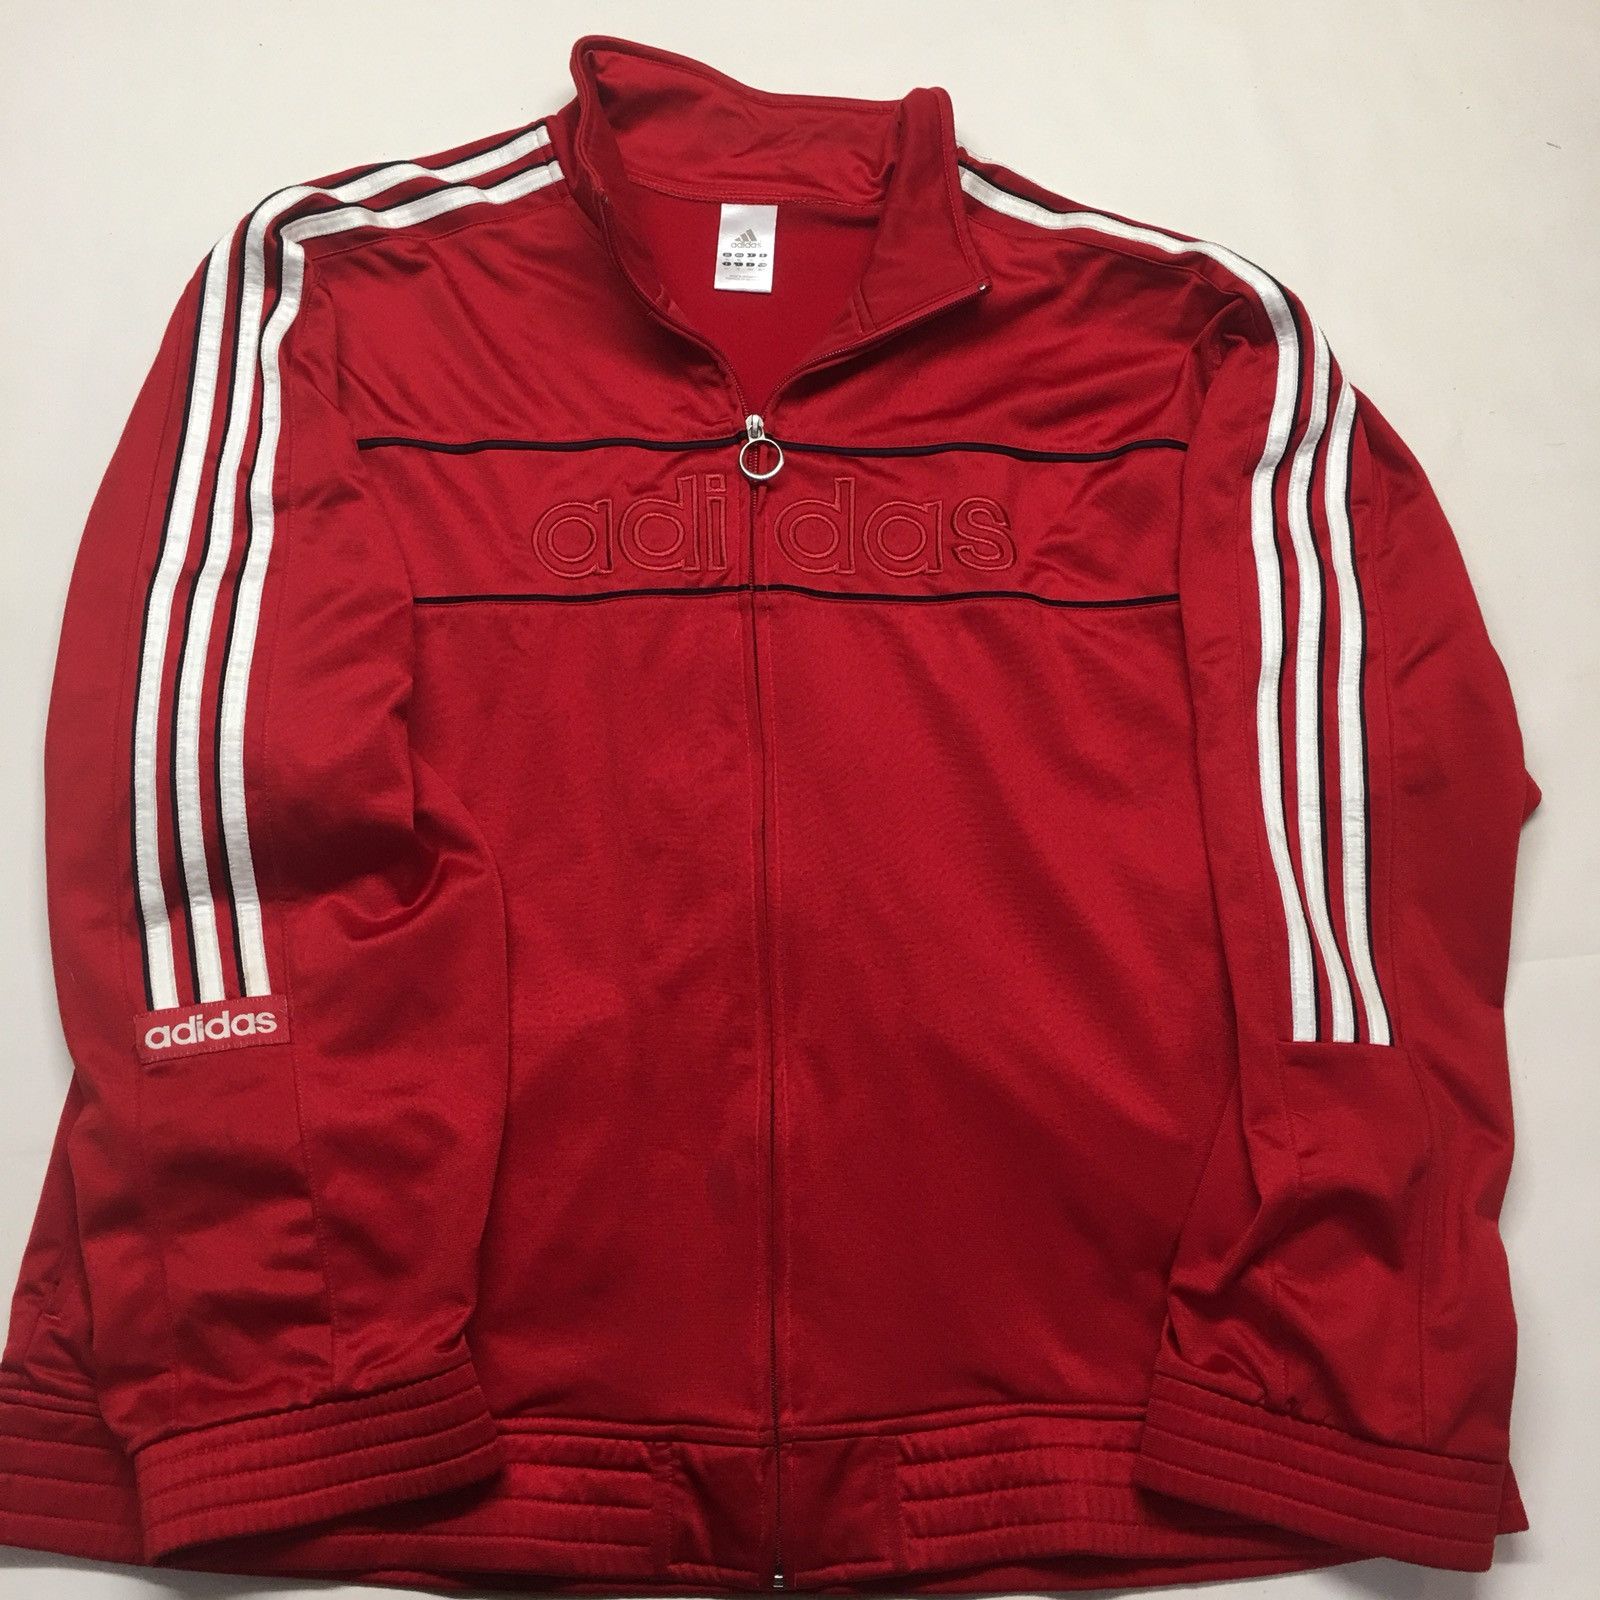 Adidas Early 90s Adidas Jacket Size US XL / EU 56 / 4 - 2 Preview